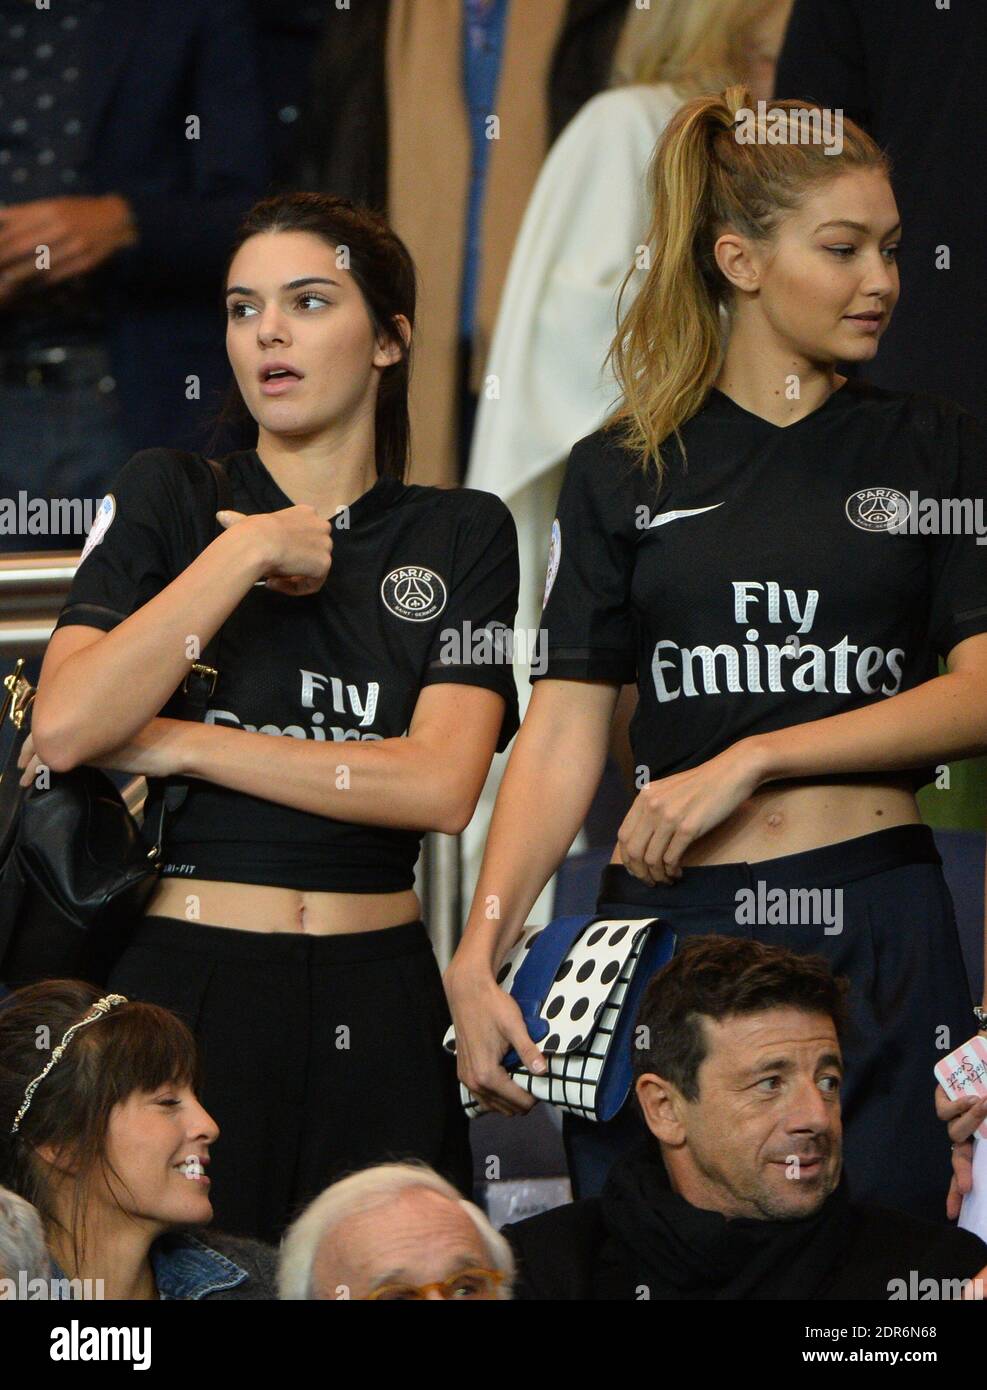 Kendall Jenner and Gigi Hadid watch from the stands French Ligue 1 match Paris  Saint-Germain FC (PSG) v Olympique de Marseille at Parc des Princes stadium  in Paris, France, on October 4,